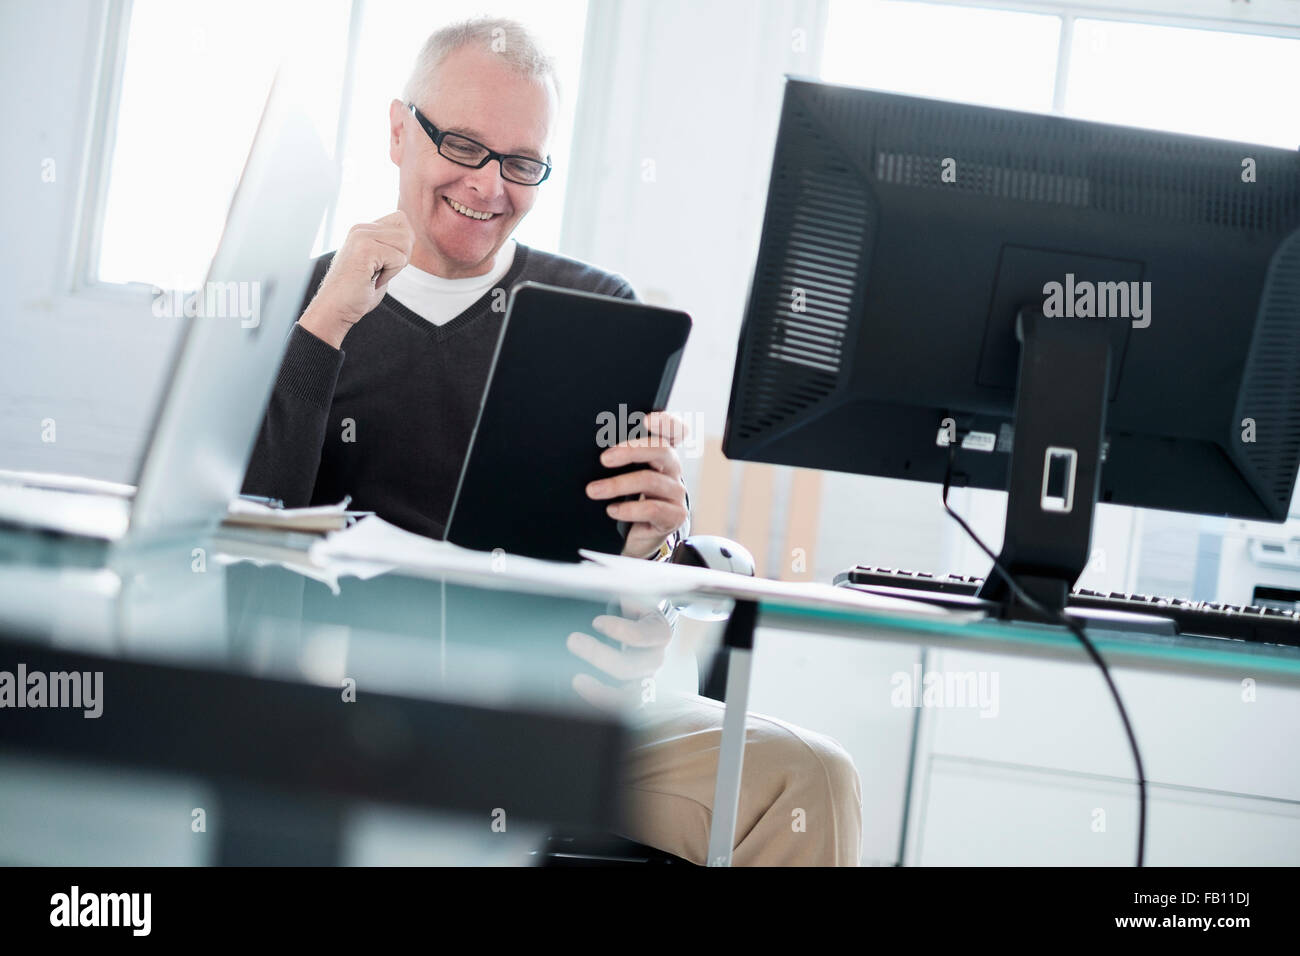 Man in office using tablet Stock Photo